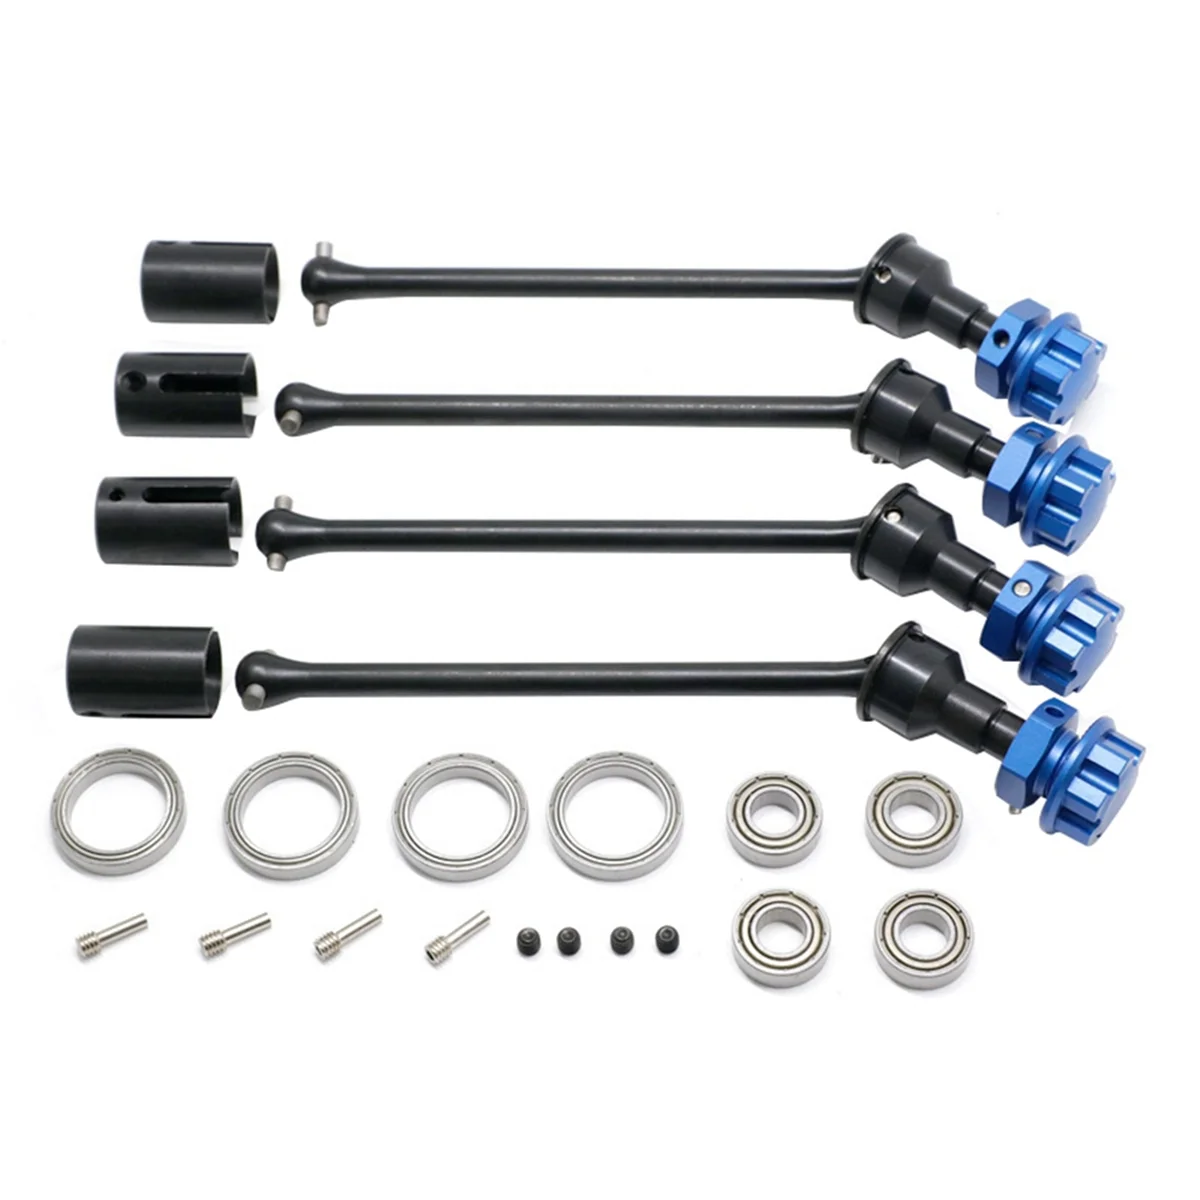 

4 PCS Steel Extended Driveshaft CVD with Splined Wheel Hex for 1/10 Traxxas MAXX RC Car Parts,Black & Blue